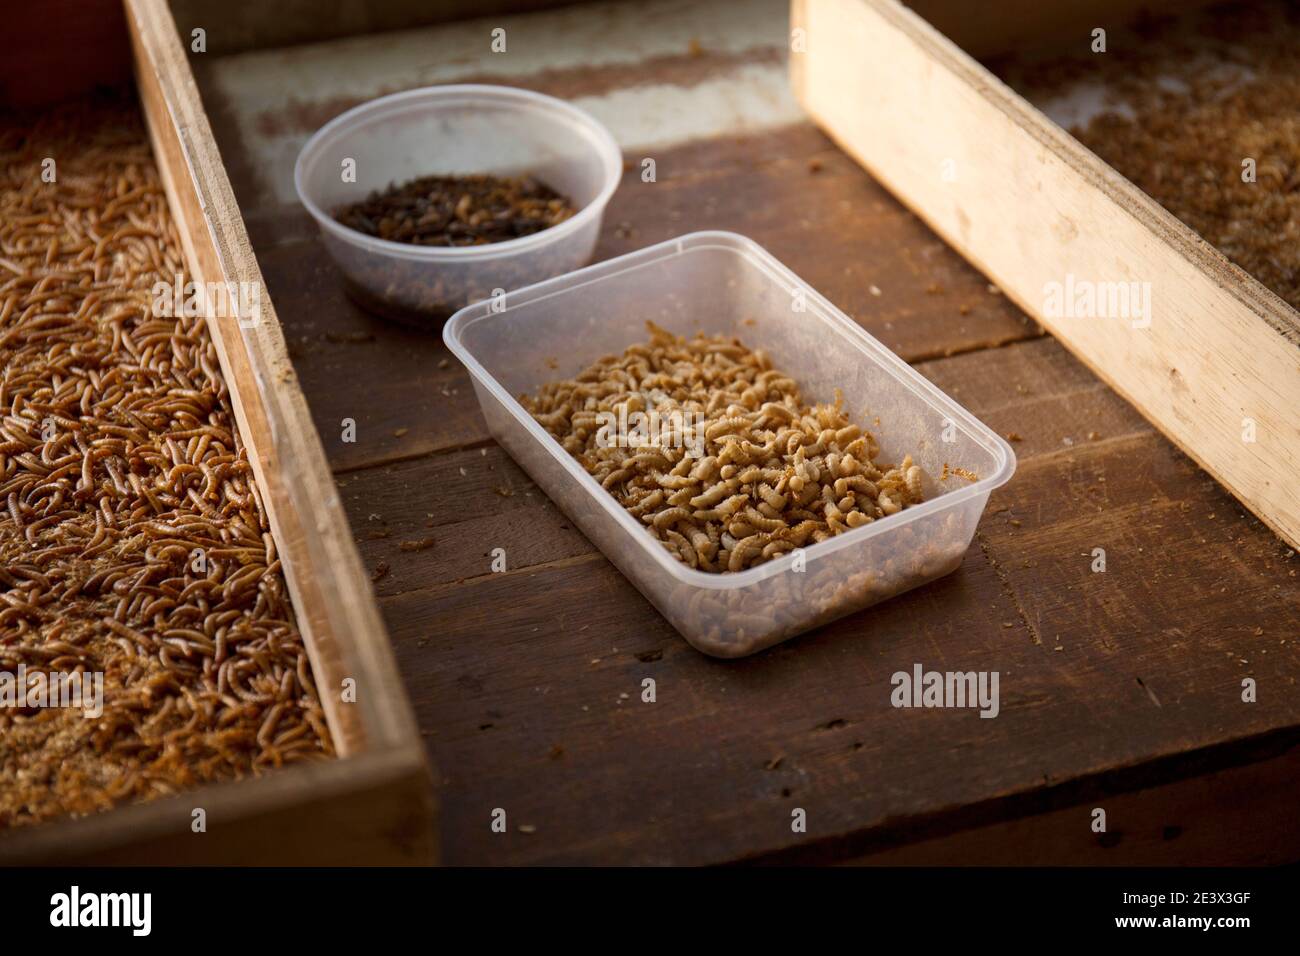 Many living Mealworm larvae put on wooden table Stock Photo